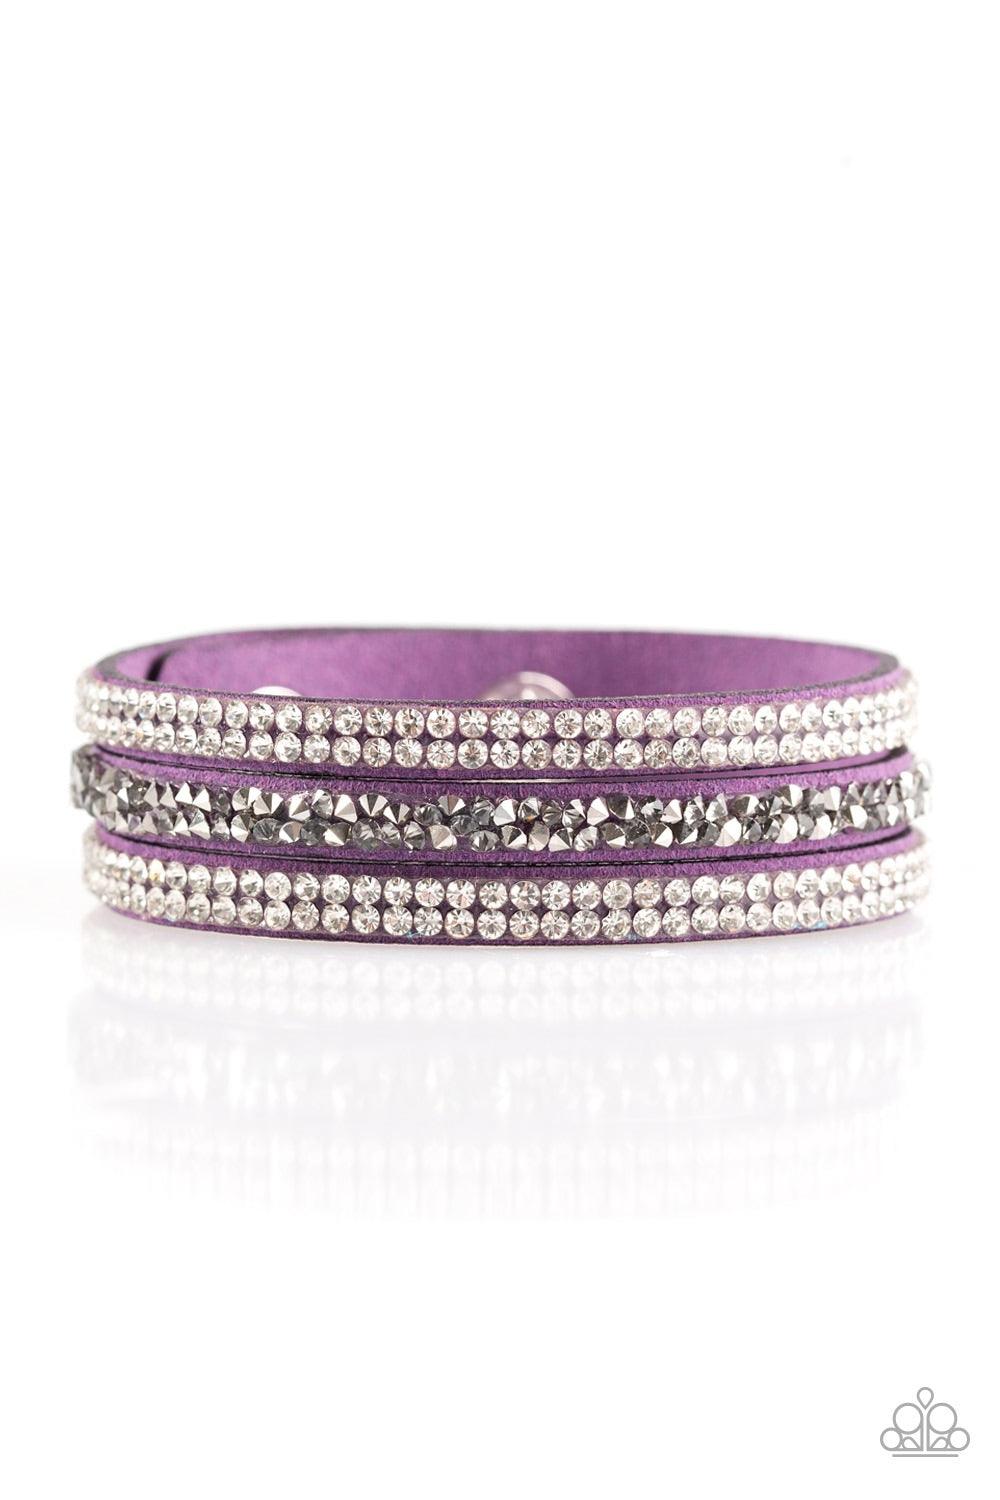 Paparazzi Accessories Mega Glam - Purple Glittery white, smoky, and glassy hematite rhinestones are sprinkled along three strands of refreshing purple suede for a glamorous look. Features an adjustable snap closure. Jewelry